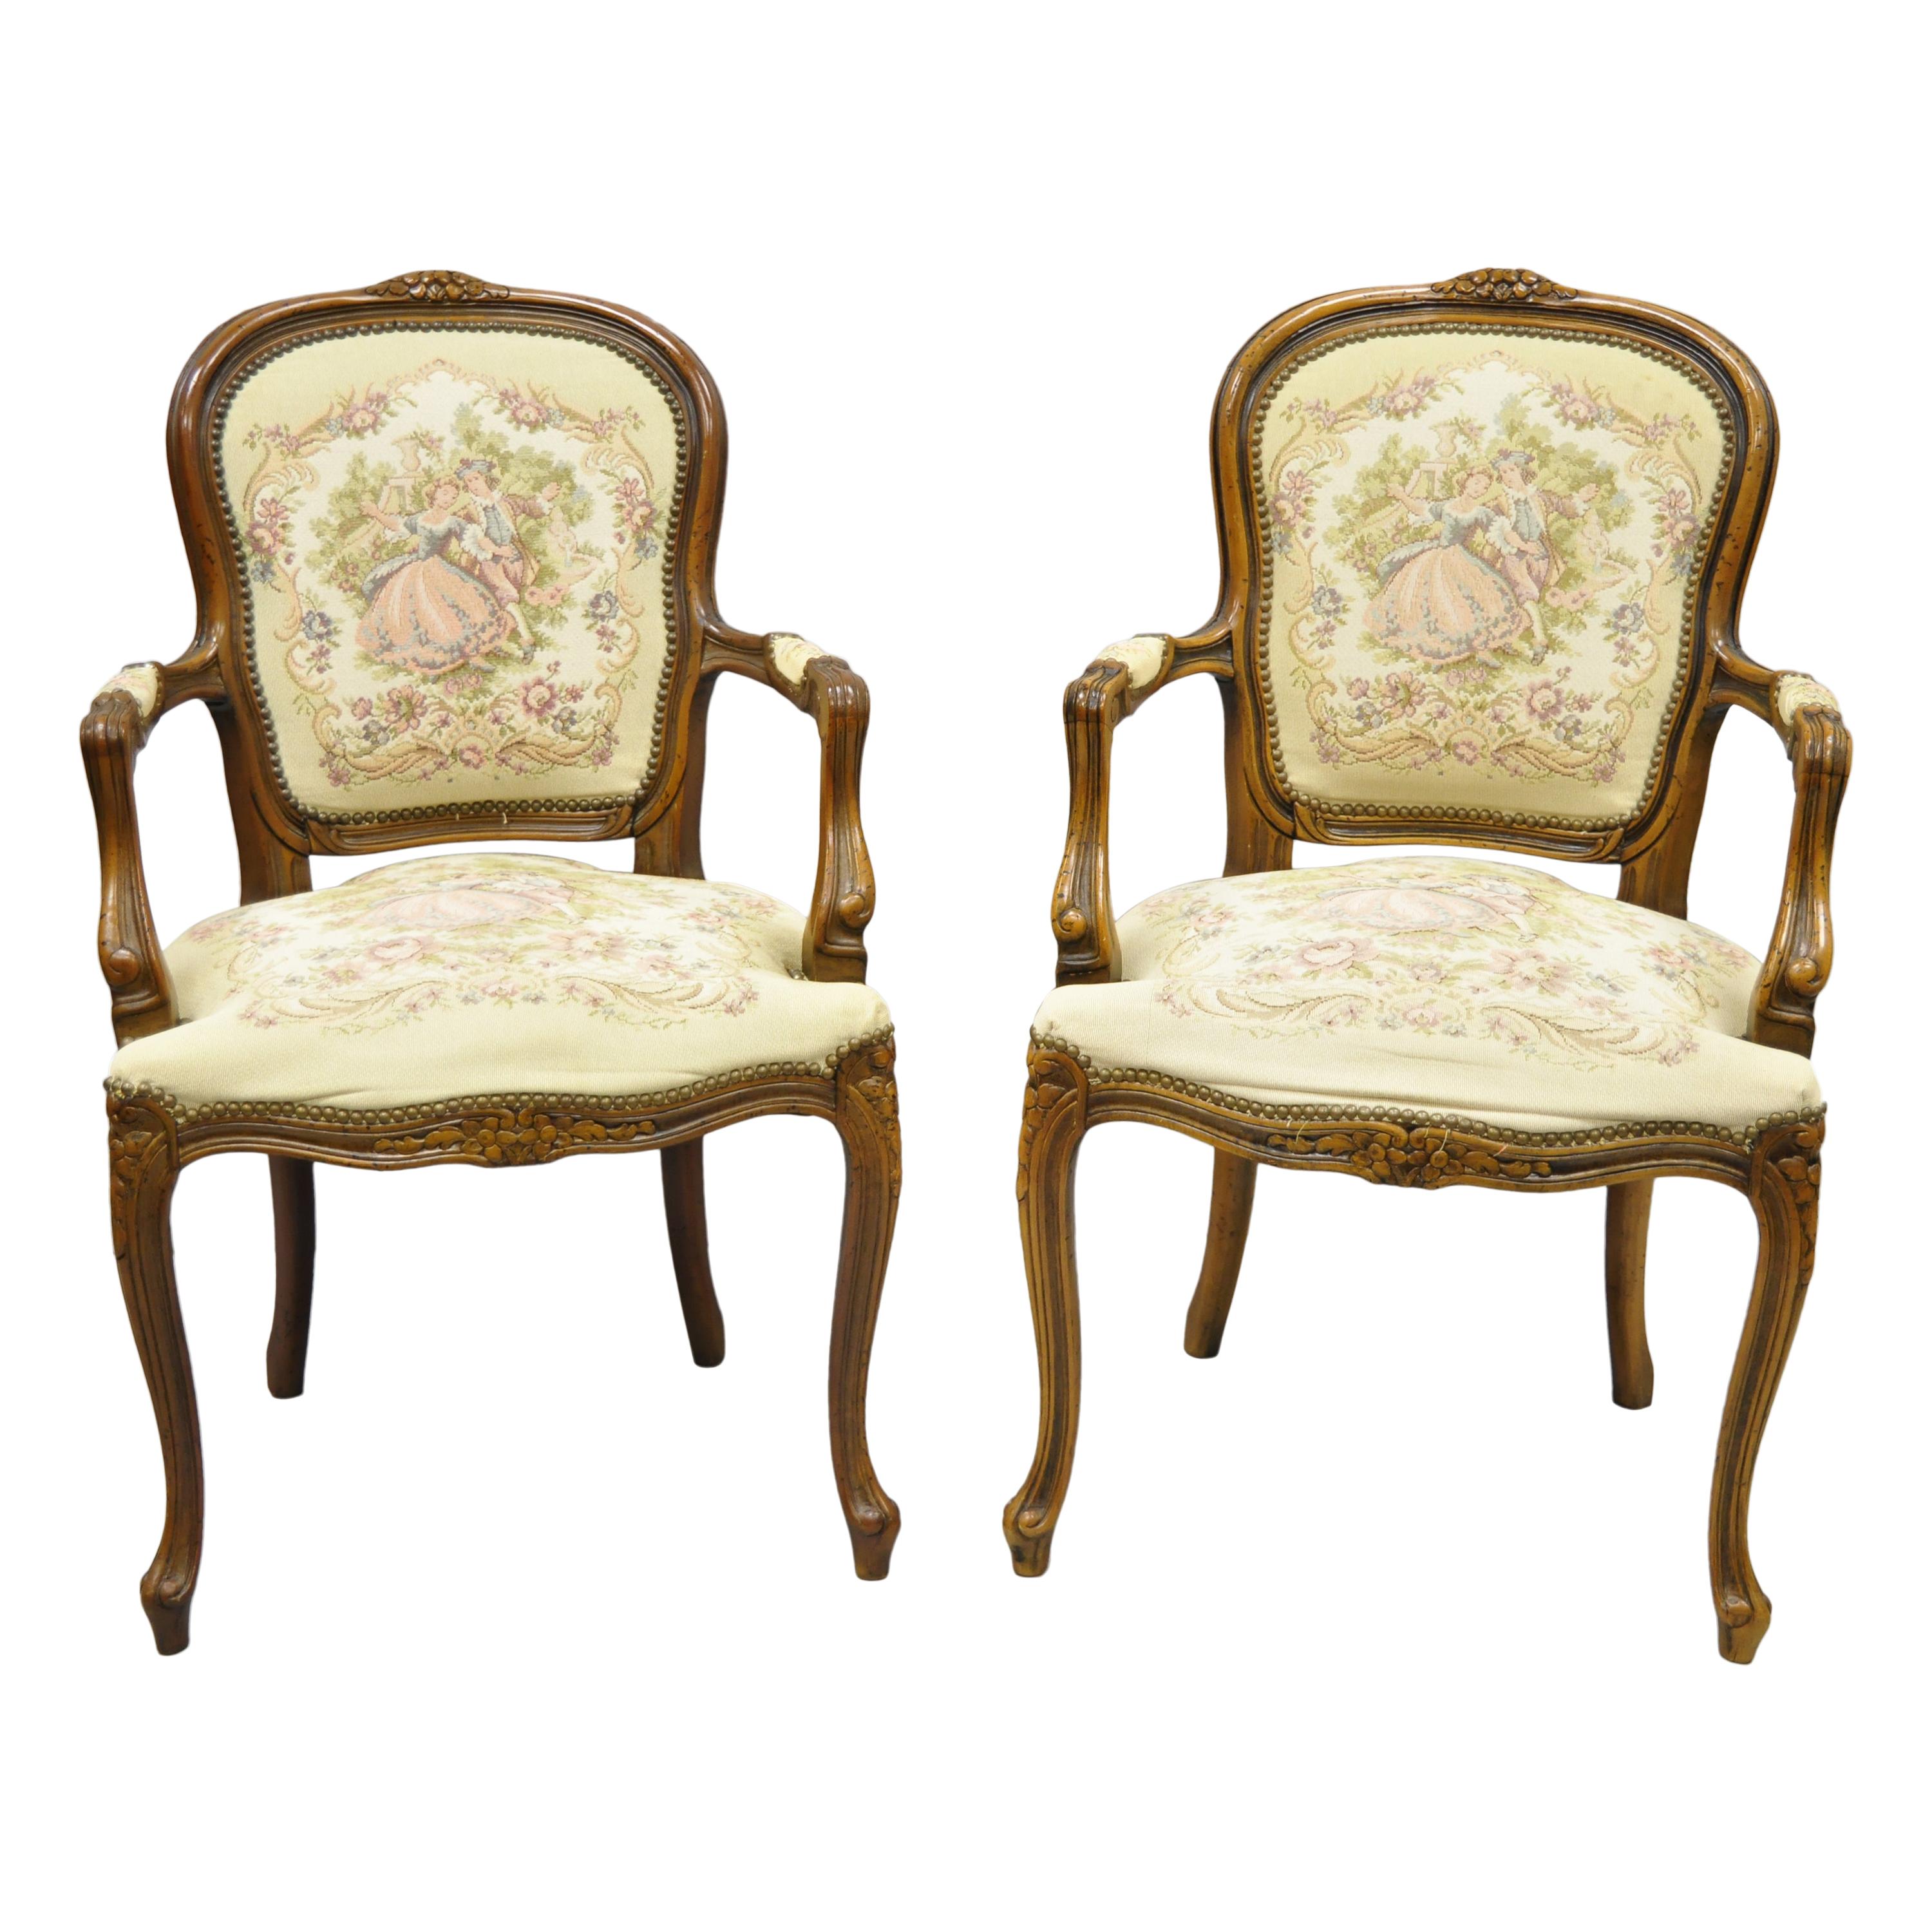 LOUIS XV ARM CHAIR FRENCH STYLE BLACK AND WHITE WITH GOLD WOOD 